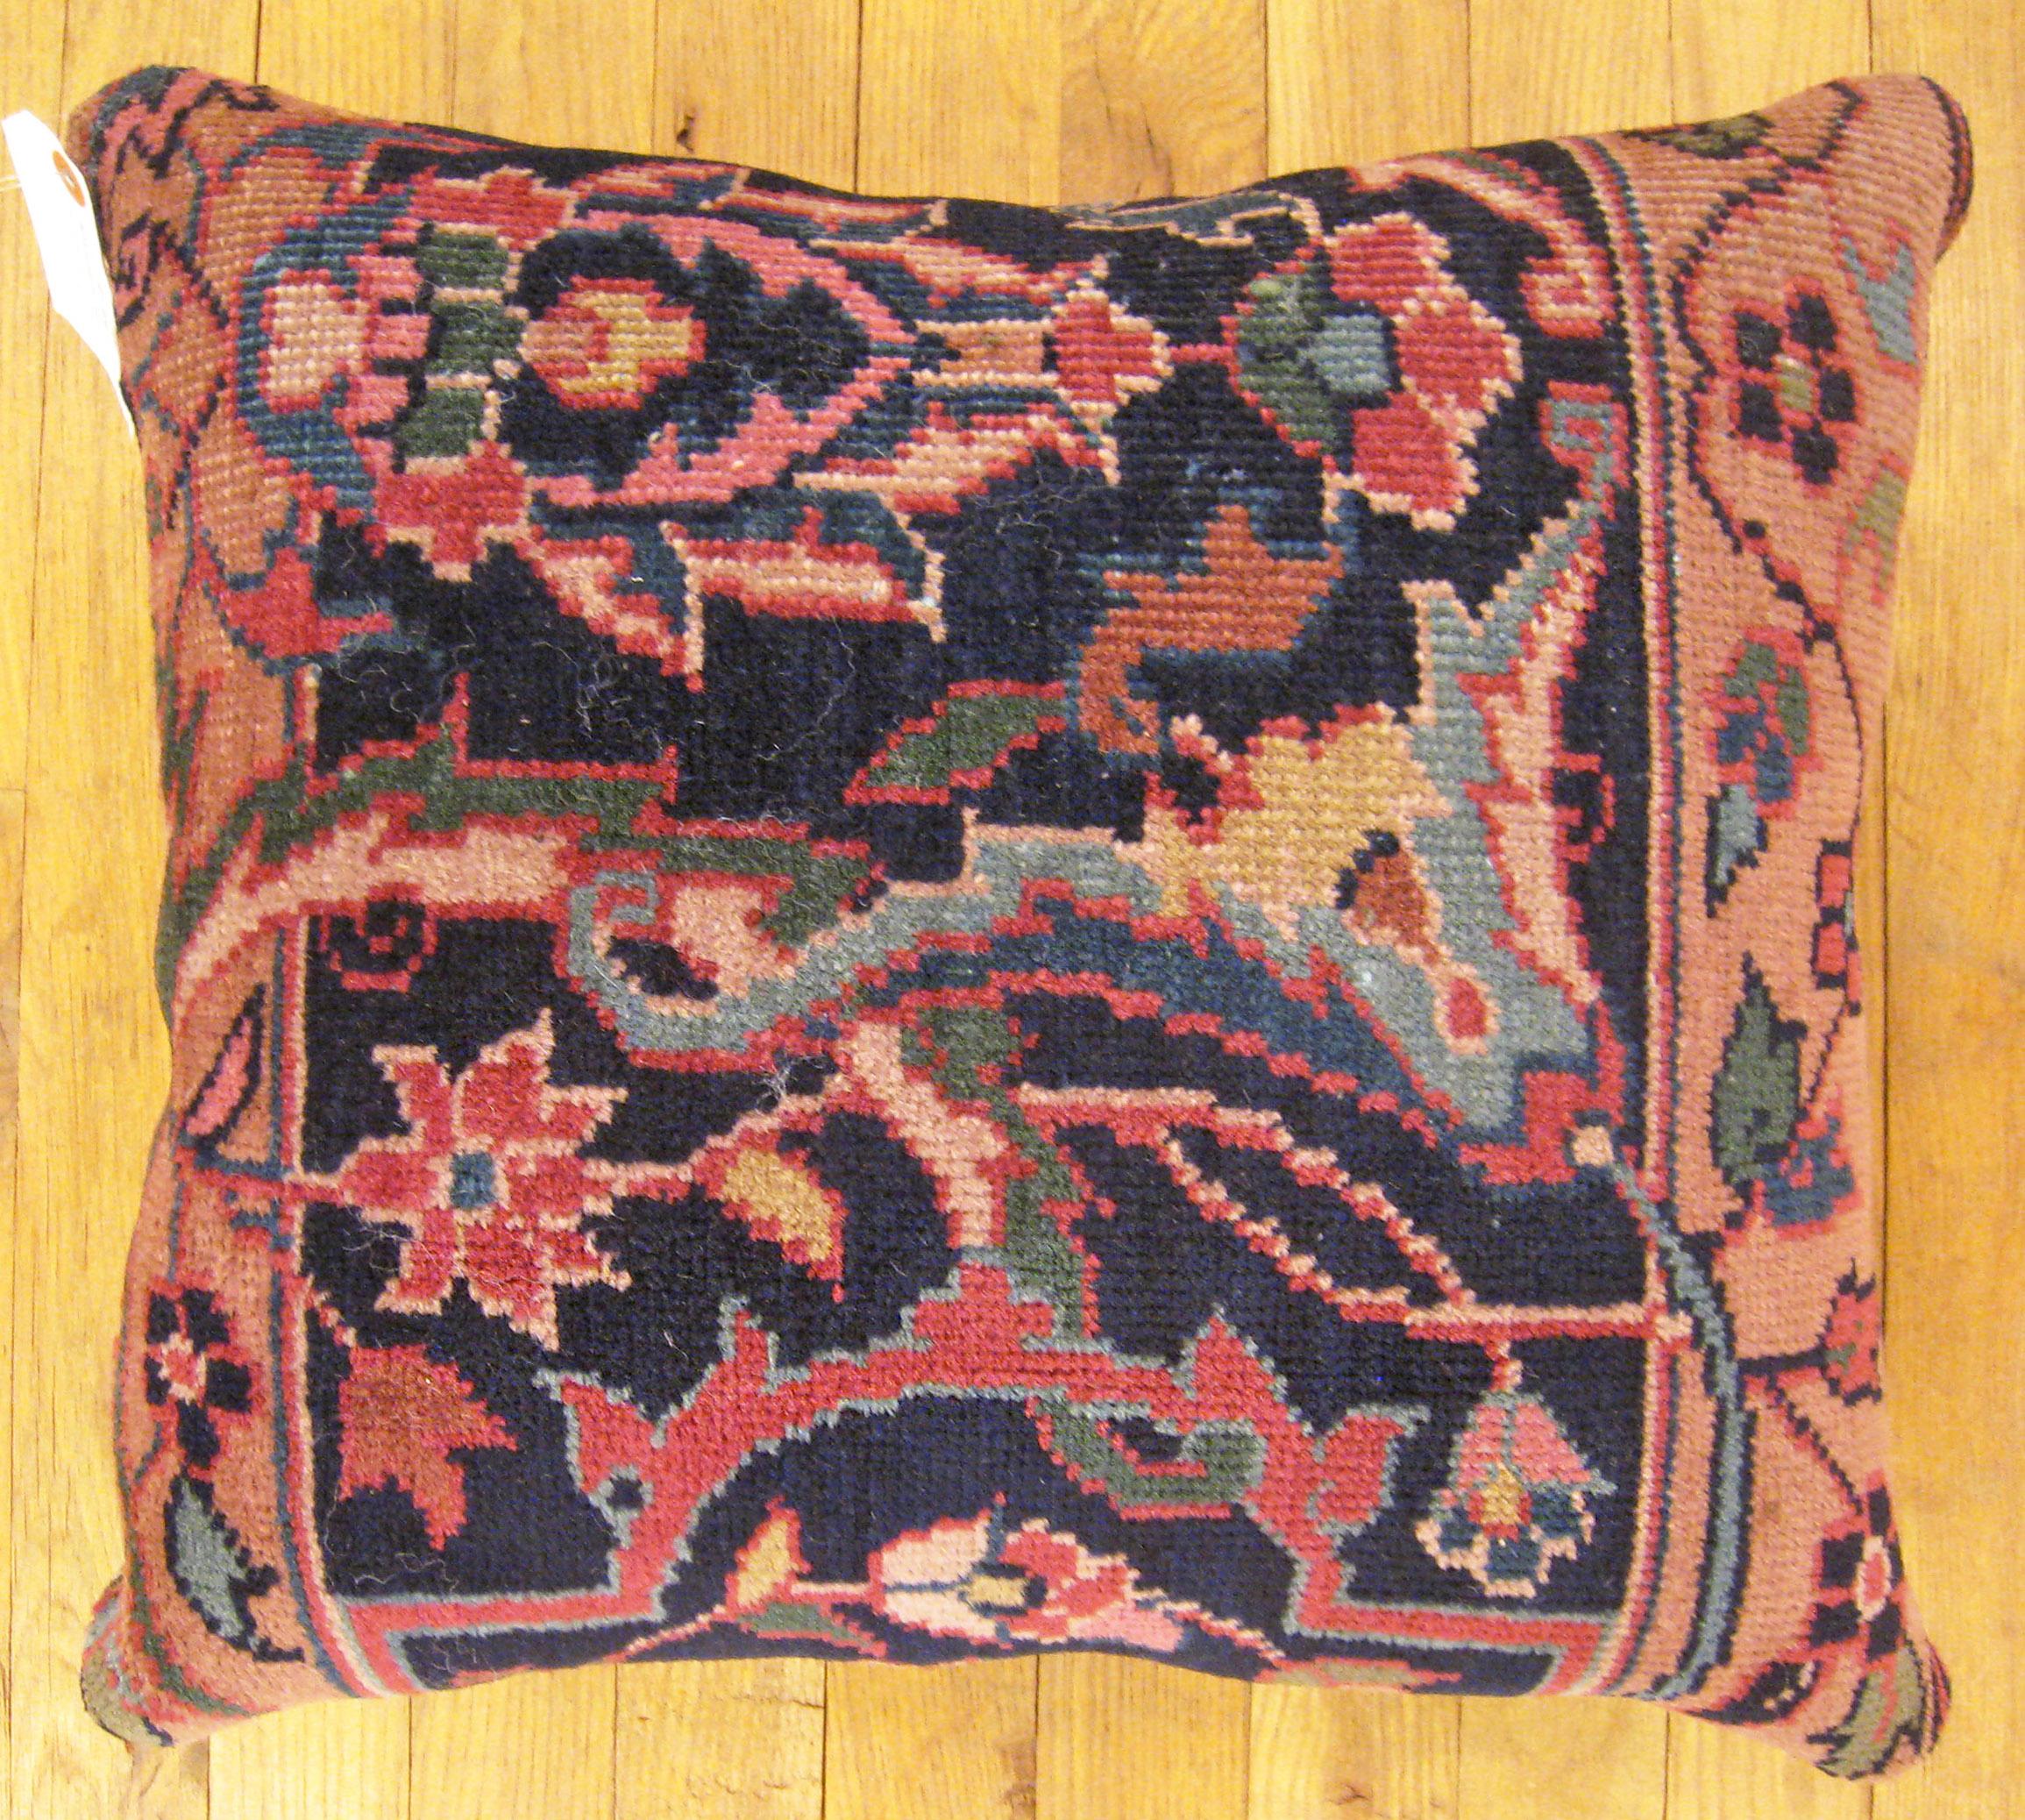 Antique Indian Agra rug pillow; size 1'6” x 1'4”.

An antique decorative pillow with floral elements allover a coral central field, size 1'6” x 1'4”. This lovely decorative pillow features an antique fabric of a Agra rug on front which is